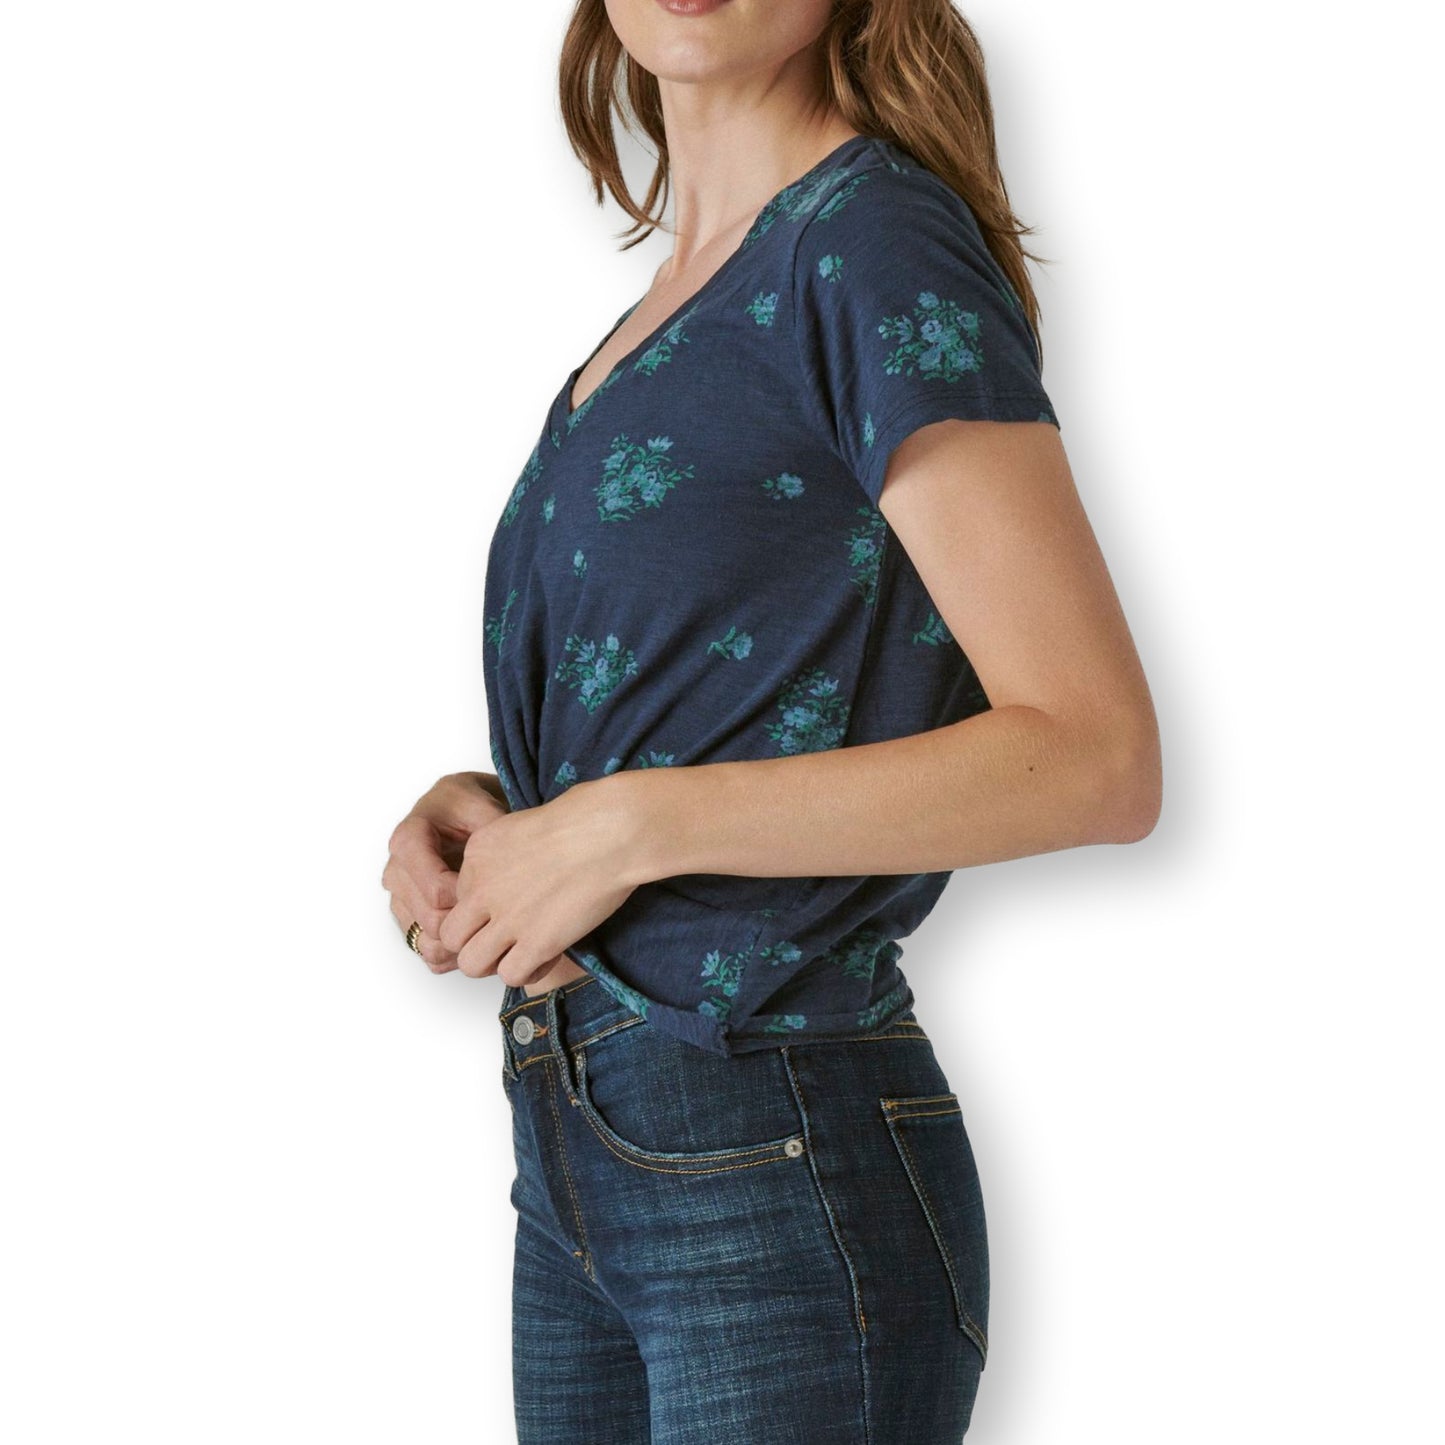 Lucky Brand Twist Front Floral Print Cotton T-Shirt